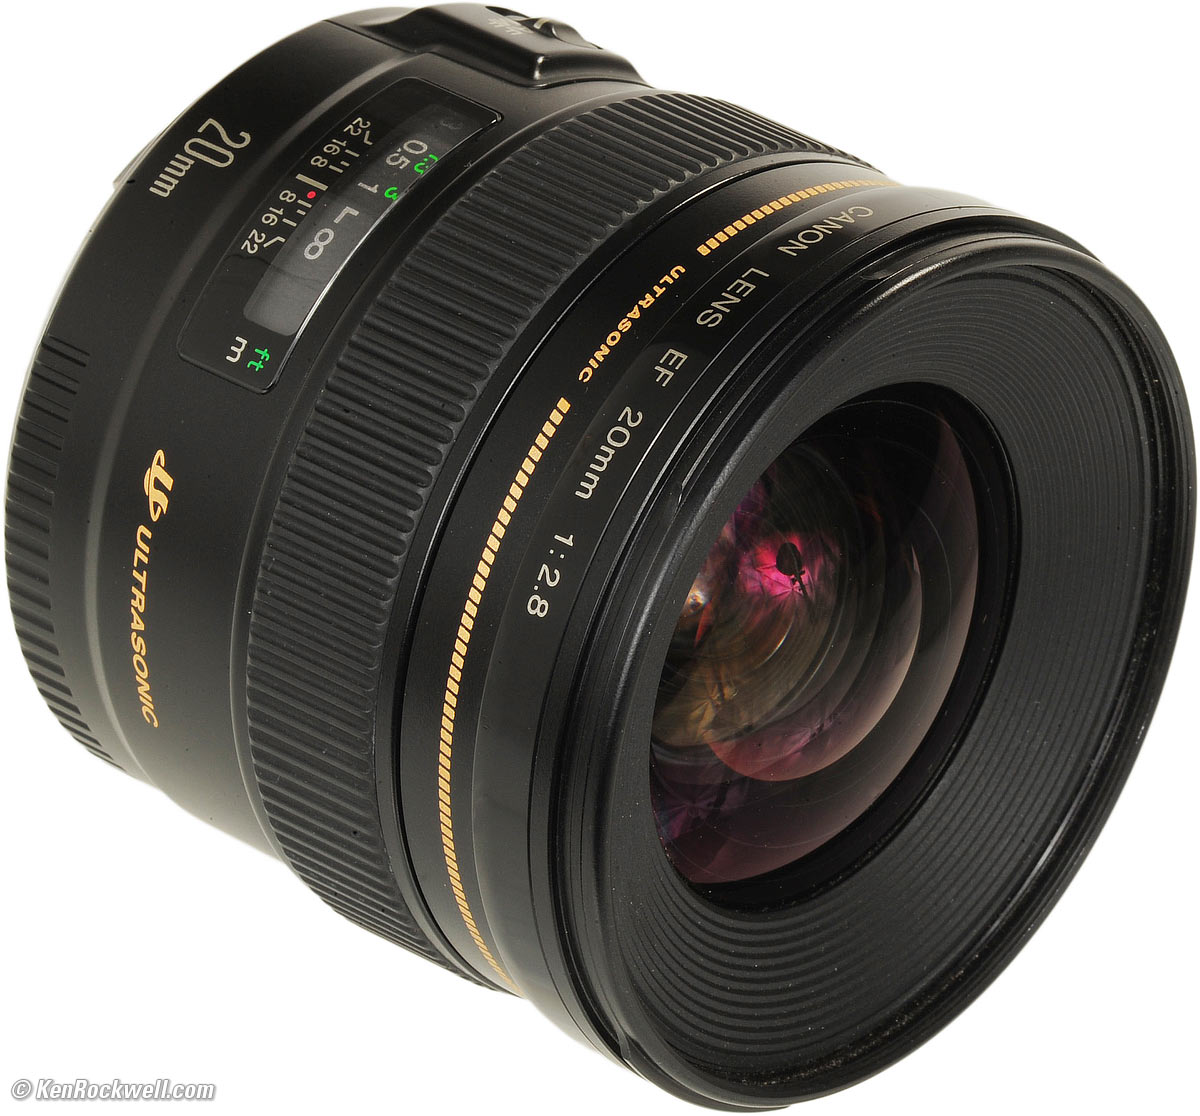 Canon 20mm f/2.8 USM Review